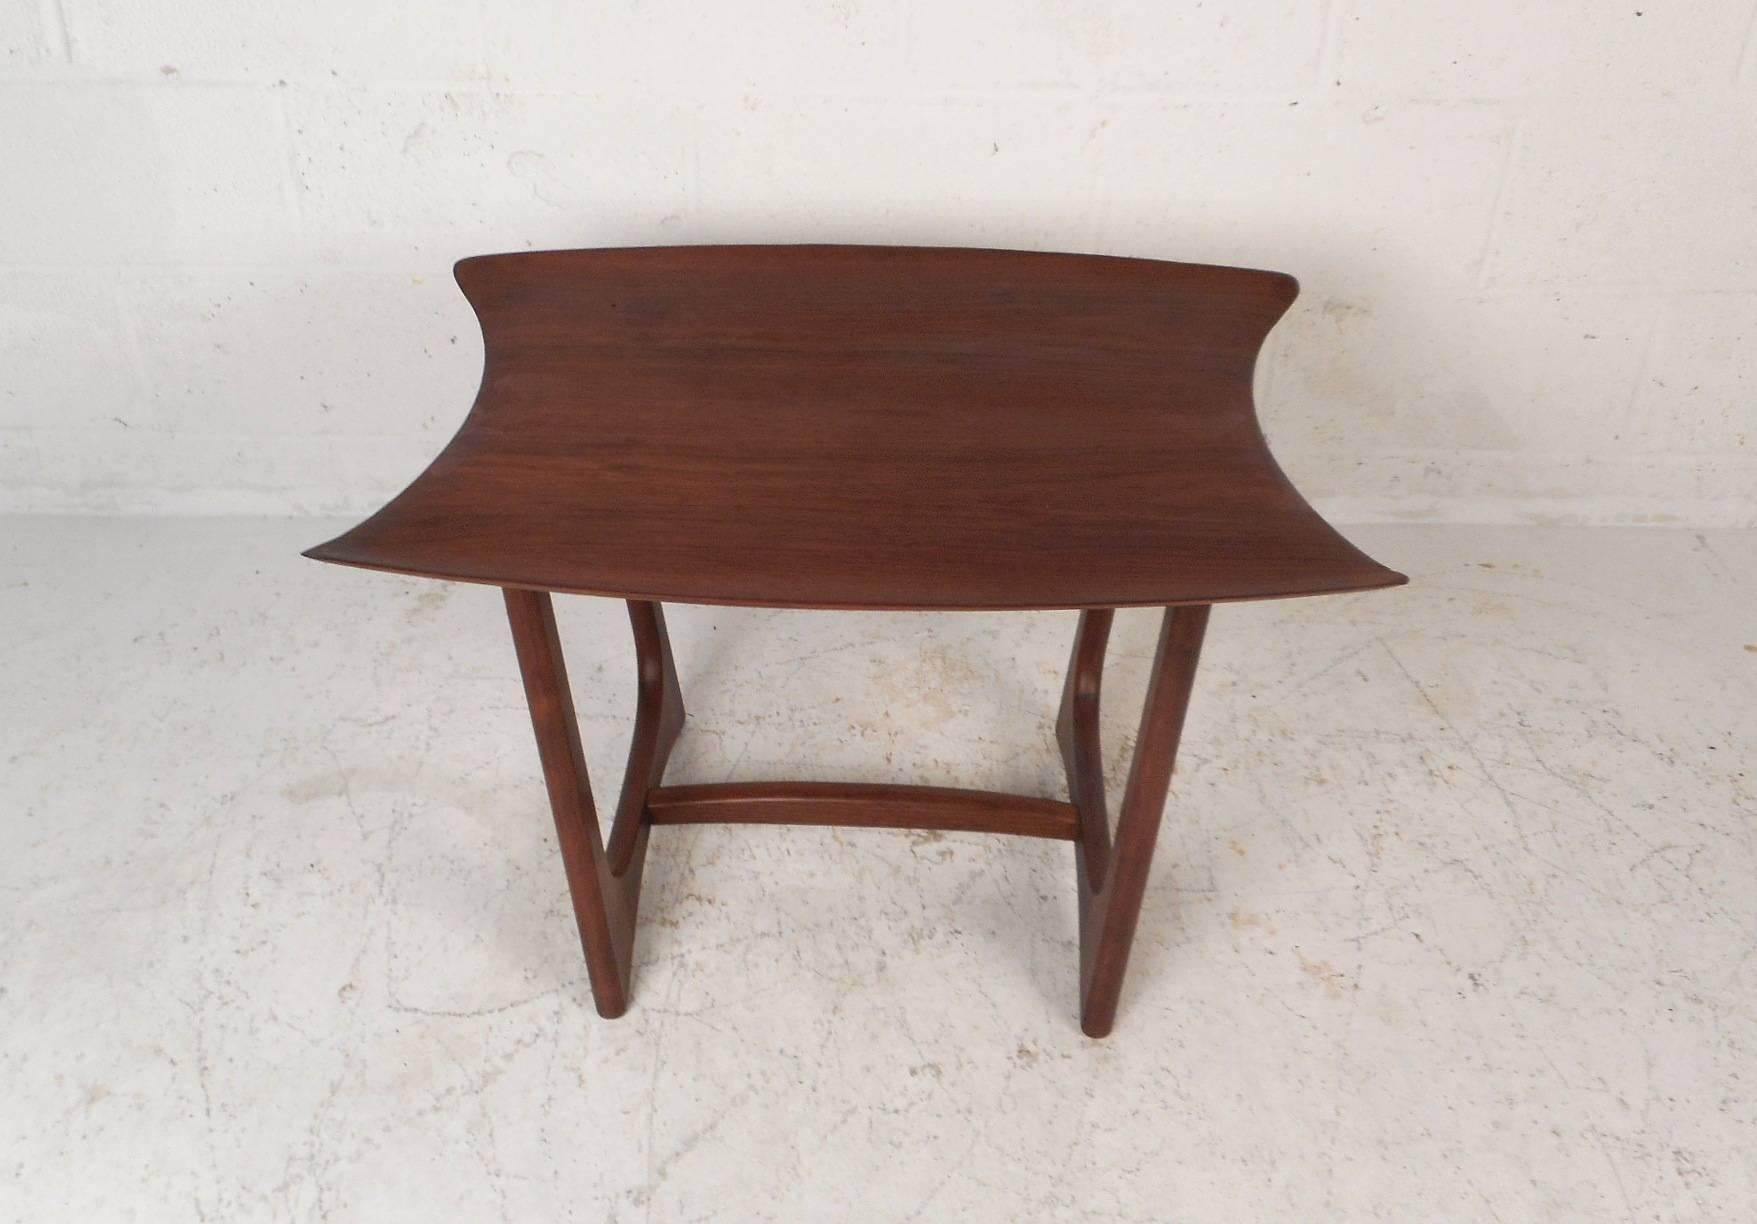 This gorgeous vintage modern walnut end table features a sculpted top and unique curved sled legs. The sleek design has an unusual top with smooth rounded edges along the front and back. Quality craftsmanship has a sturdy base with a stretcher